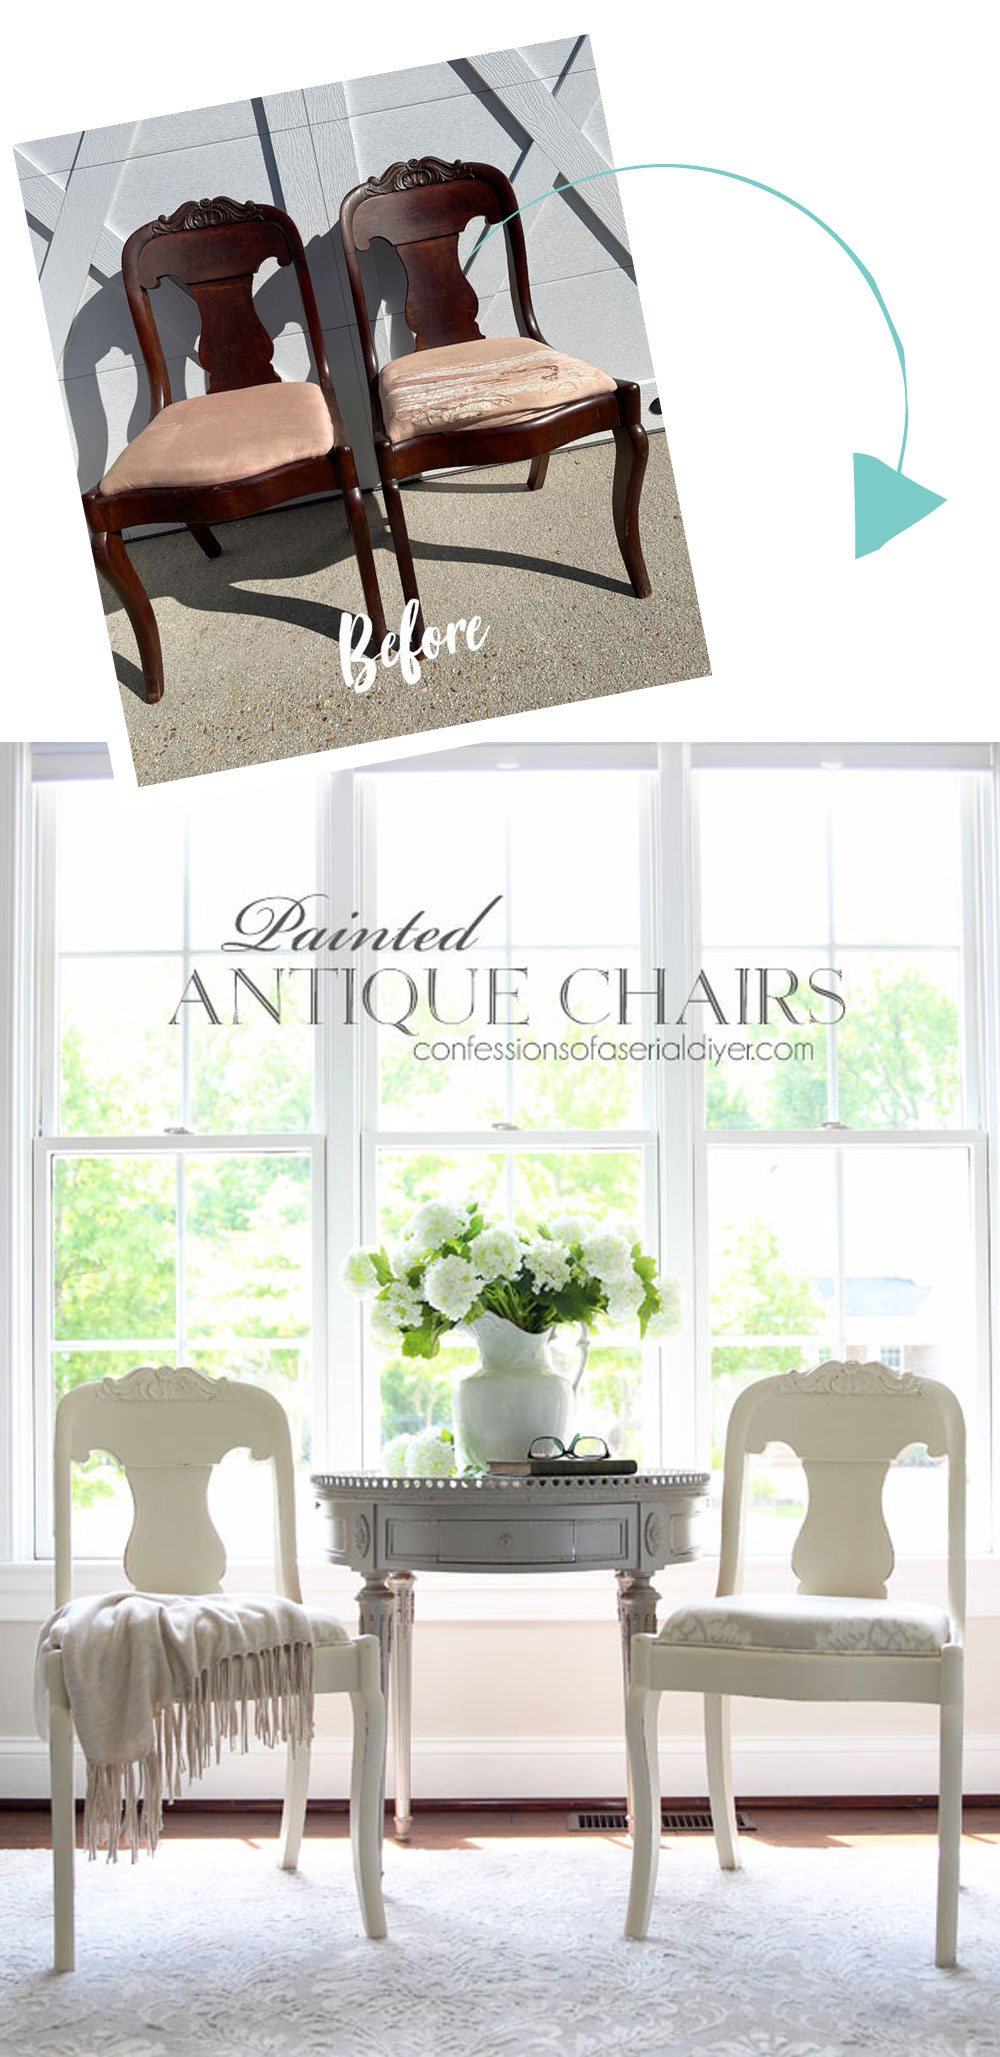 Drop Cloth painted antique chairs